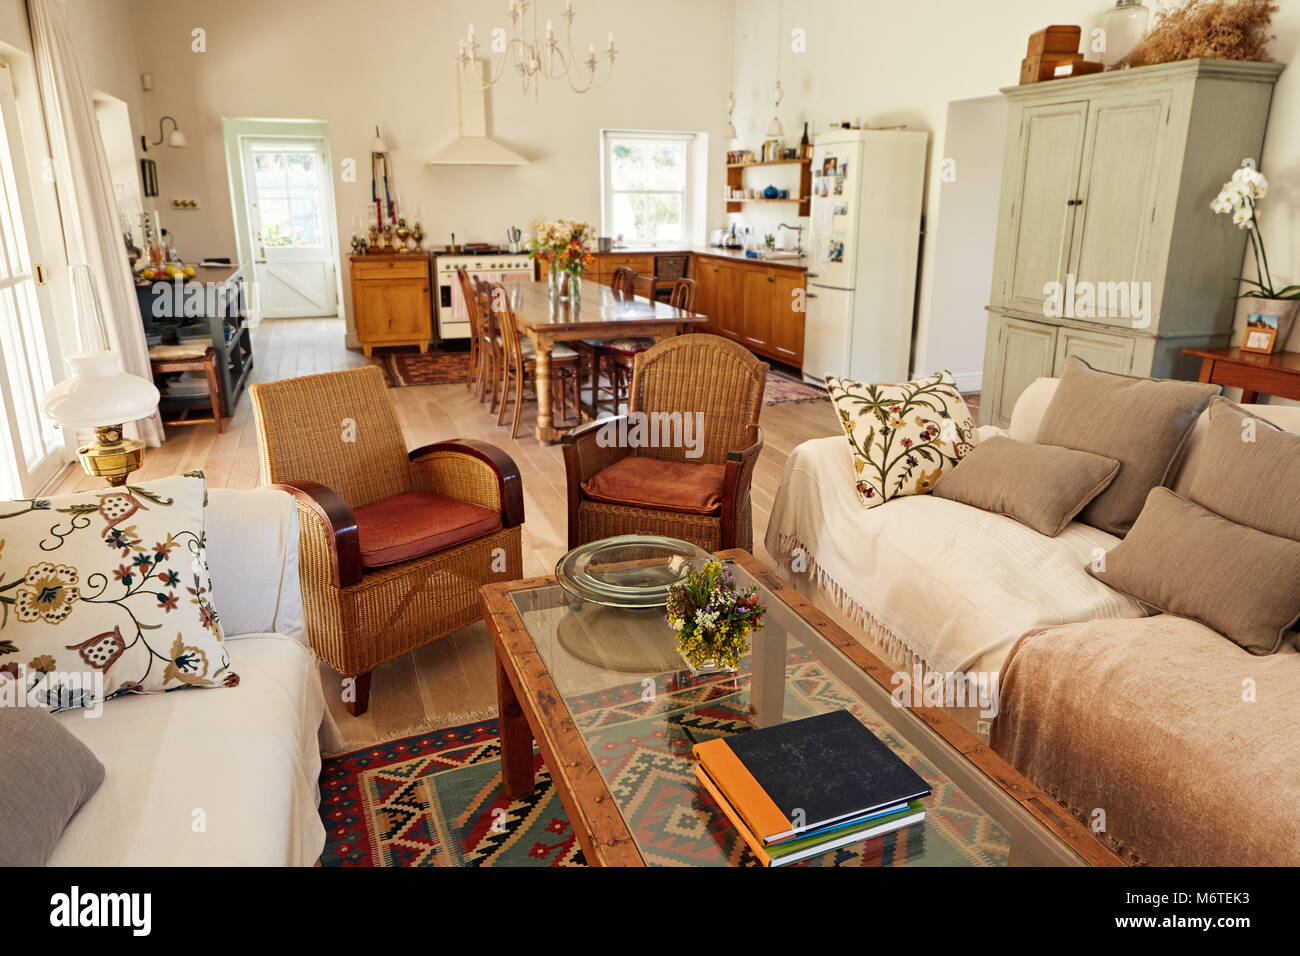 Interior of the lounge and kitchen in a country home Stock Photo